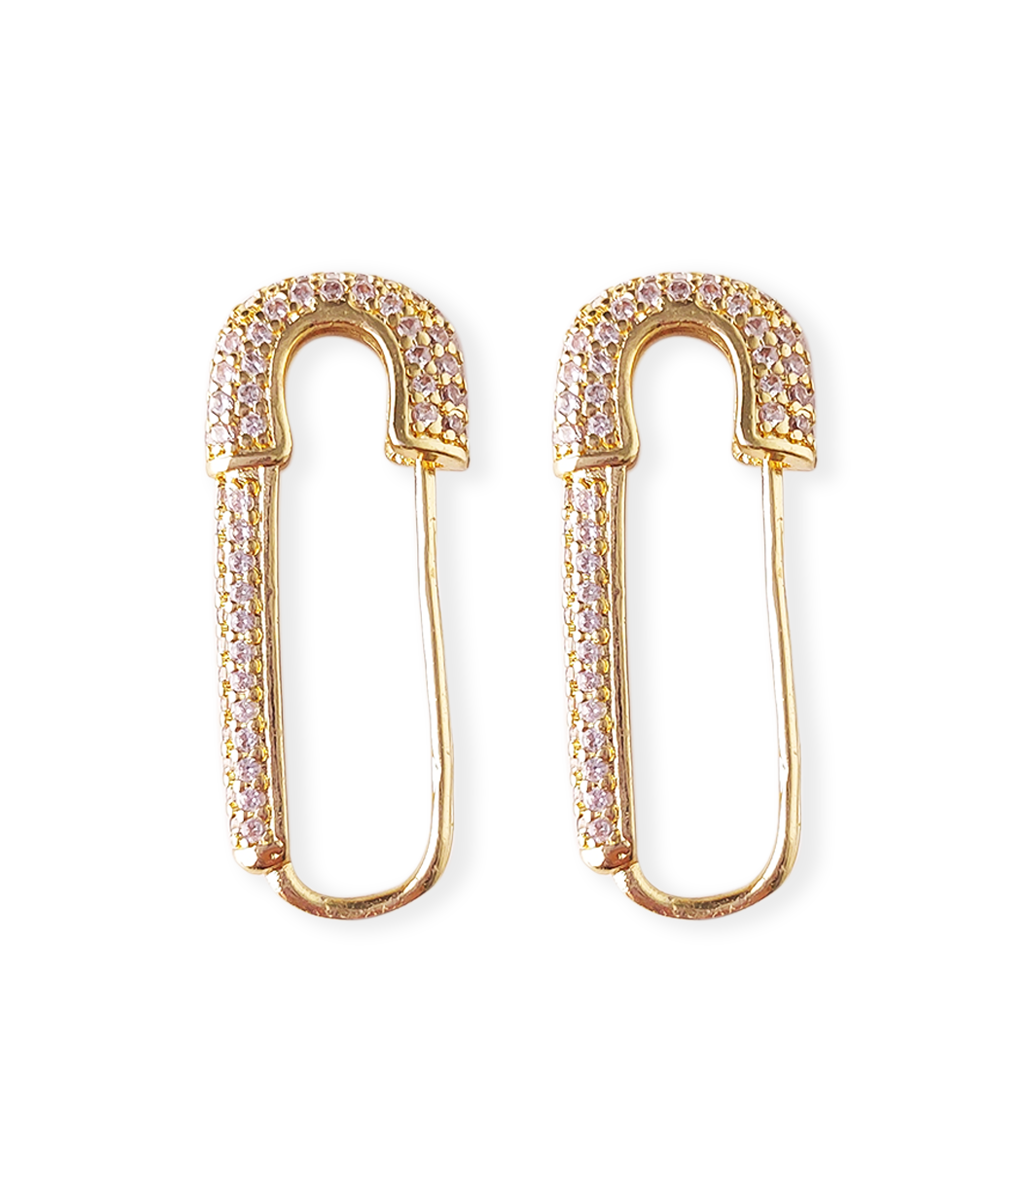 Cubic Zirconia studded safety pin earrings